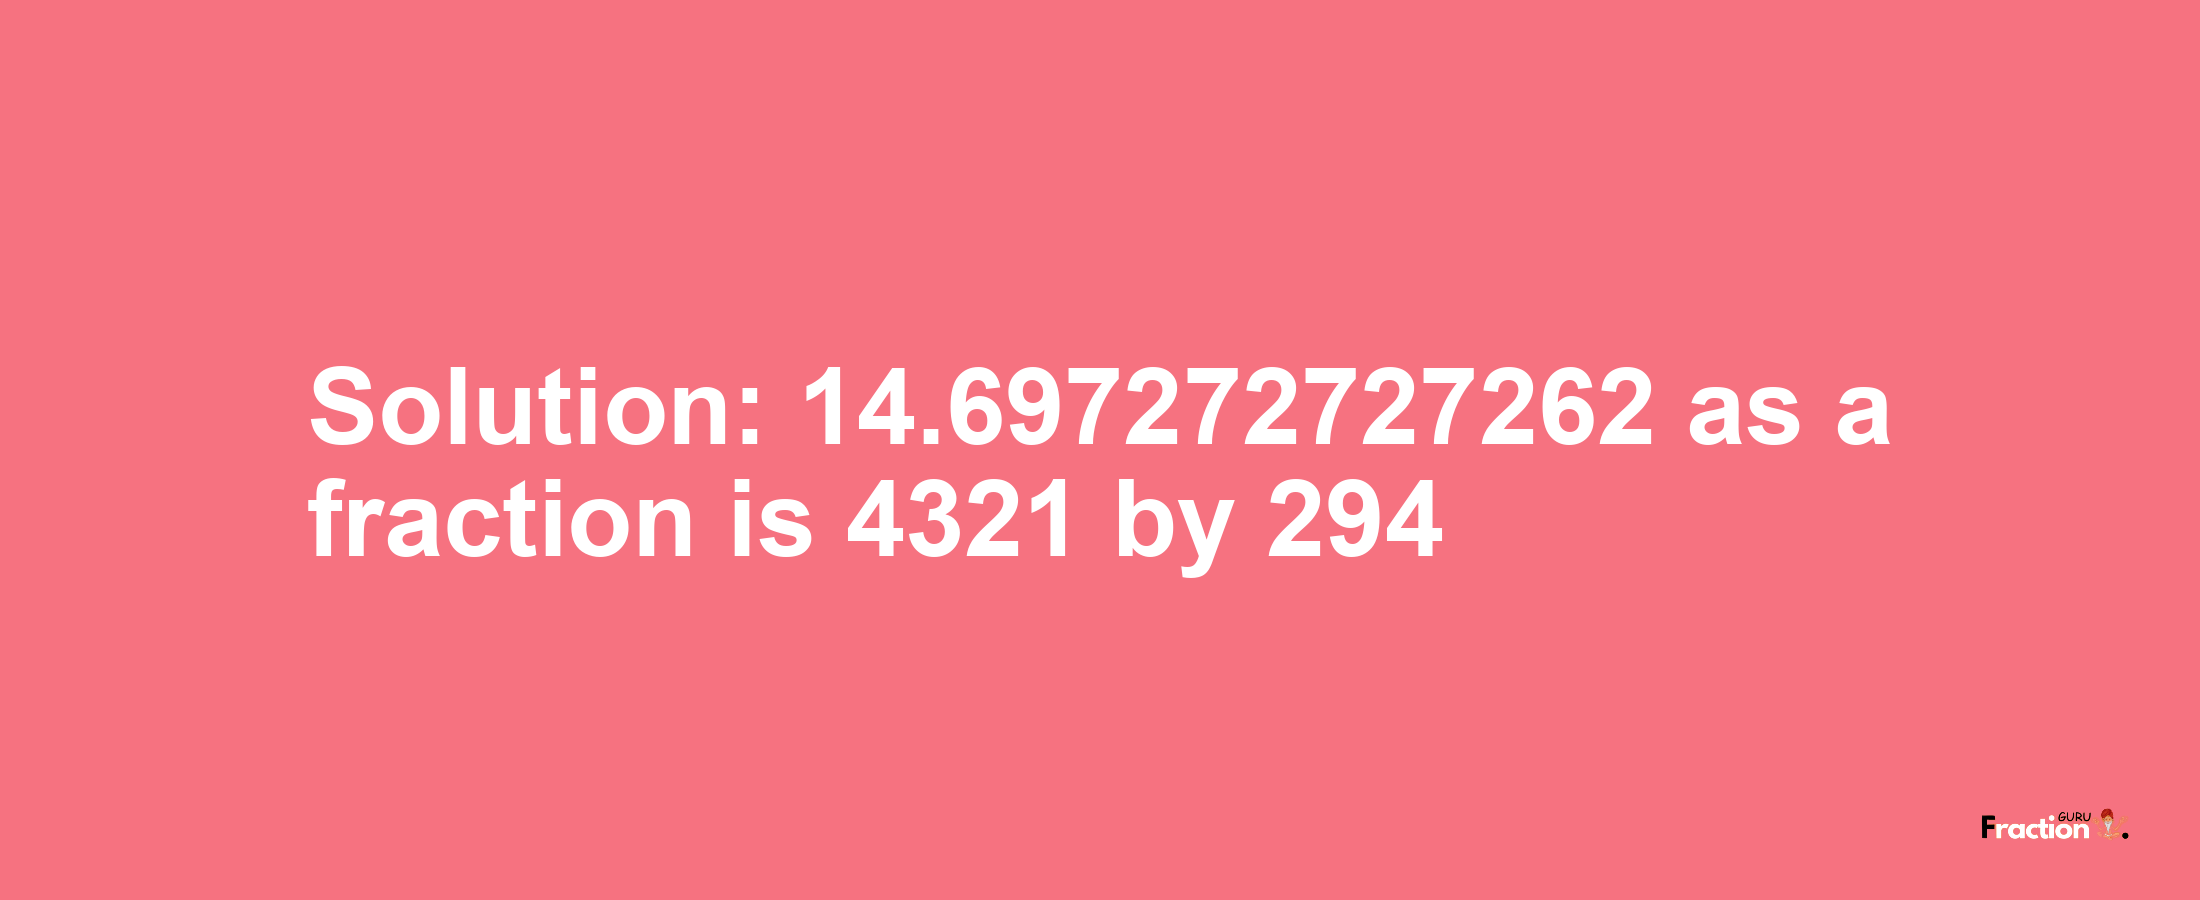 Solution:14.697272727262 as a fraction is 4321/294